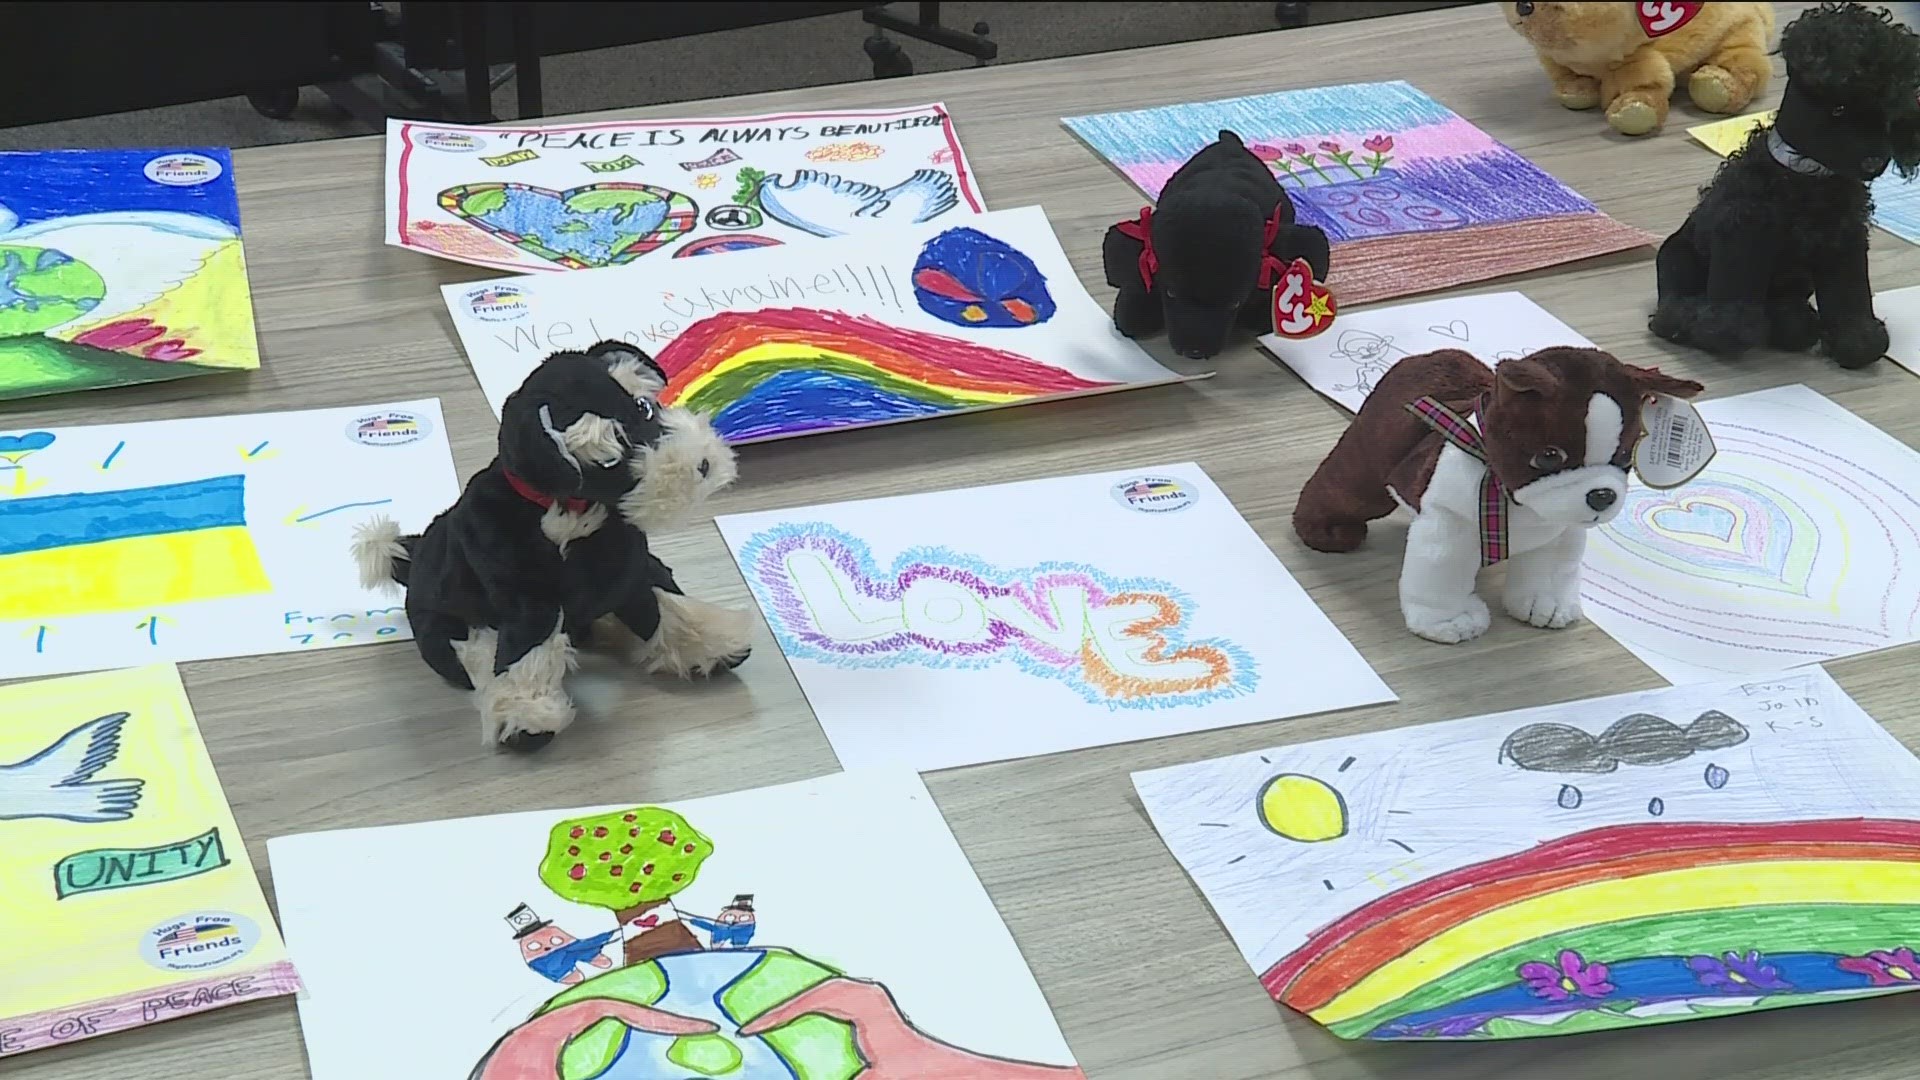 A large collection of beanie babies is headed to children in Ukraine along with artwork from a local nonprofit organization.